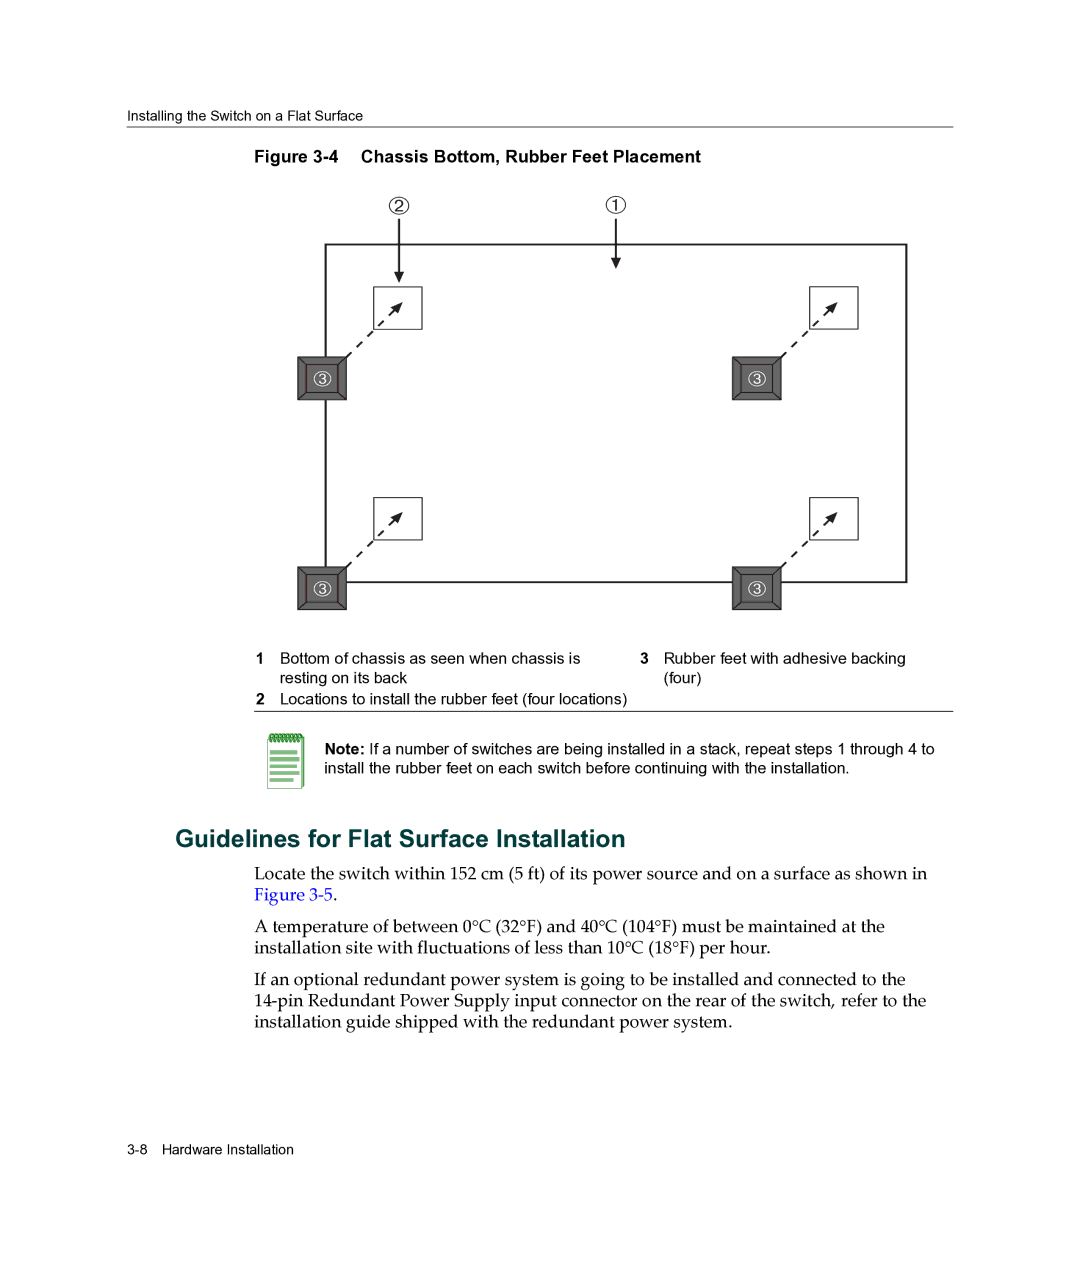 Enterasys Networks A2H124-24FX manual Guidelines for Flat Surface Installation, Chassis Bottom, Rubber Feet Placement 